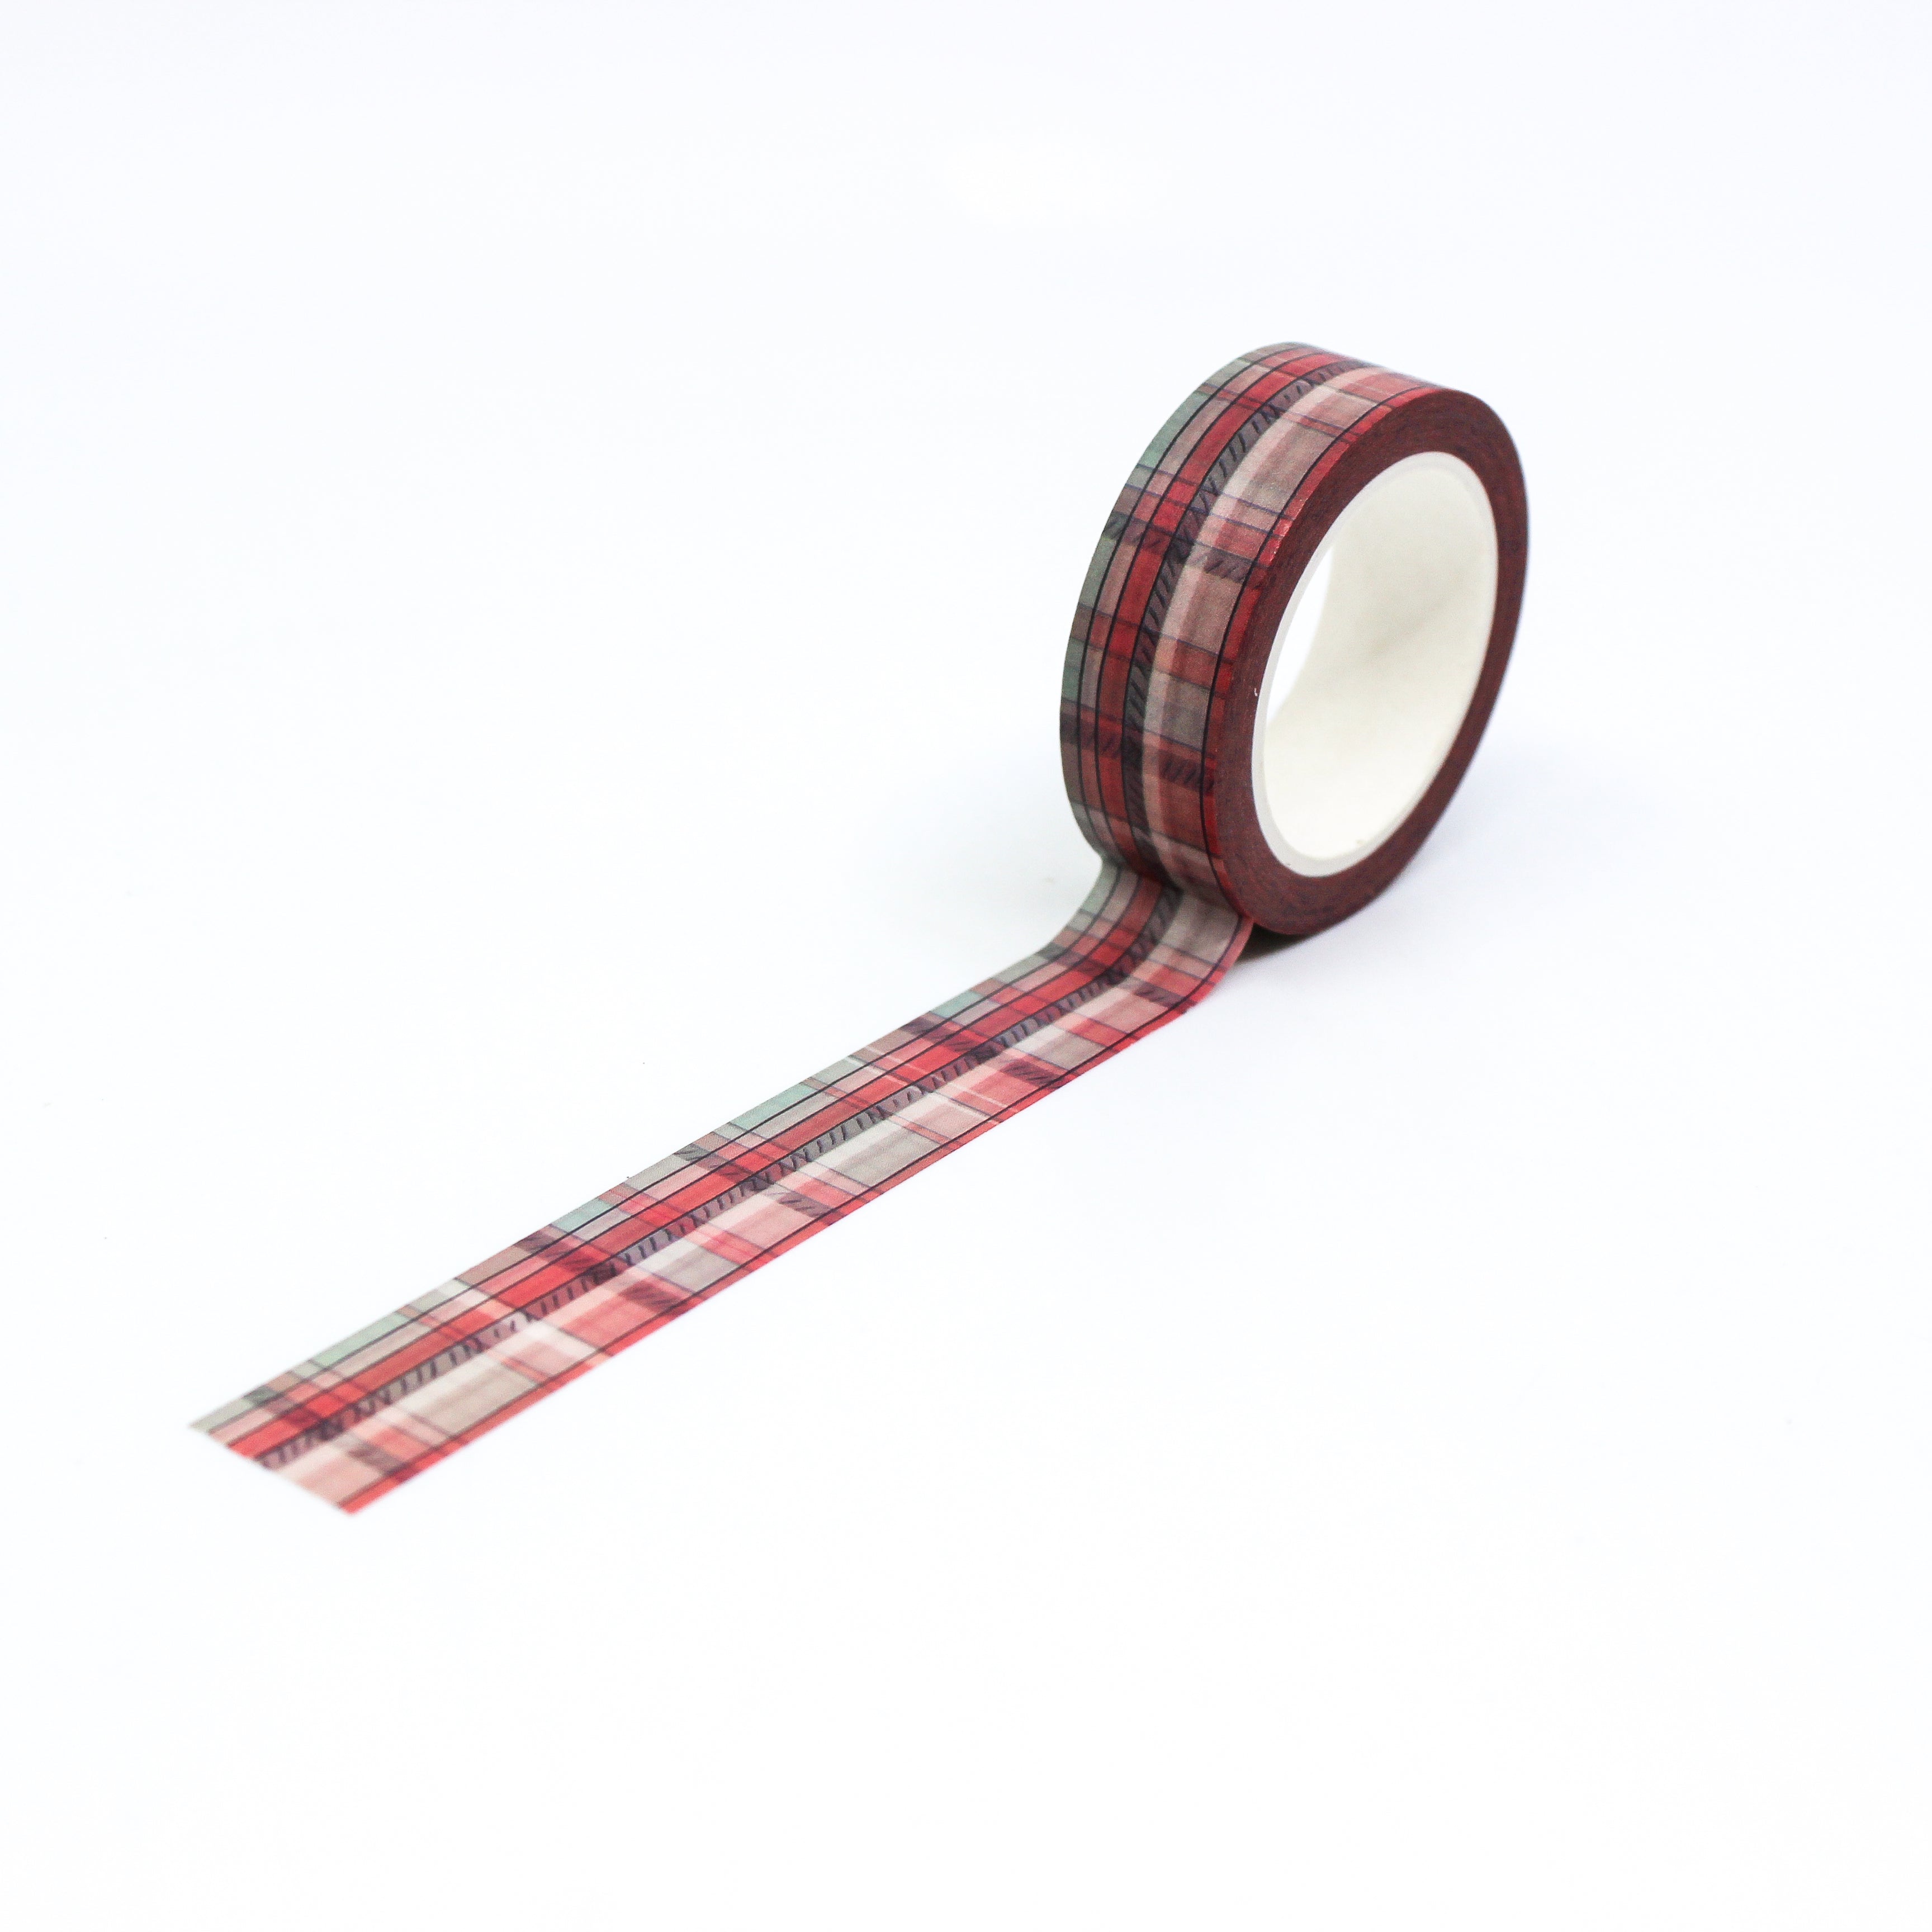 This is a full pattern repeat view of stripe and red plaid washi tape from BBB Supplies Craft Shop